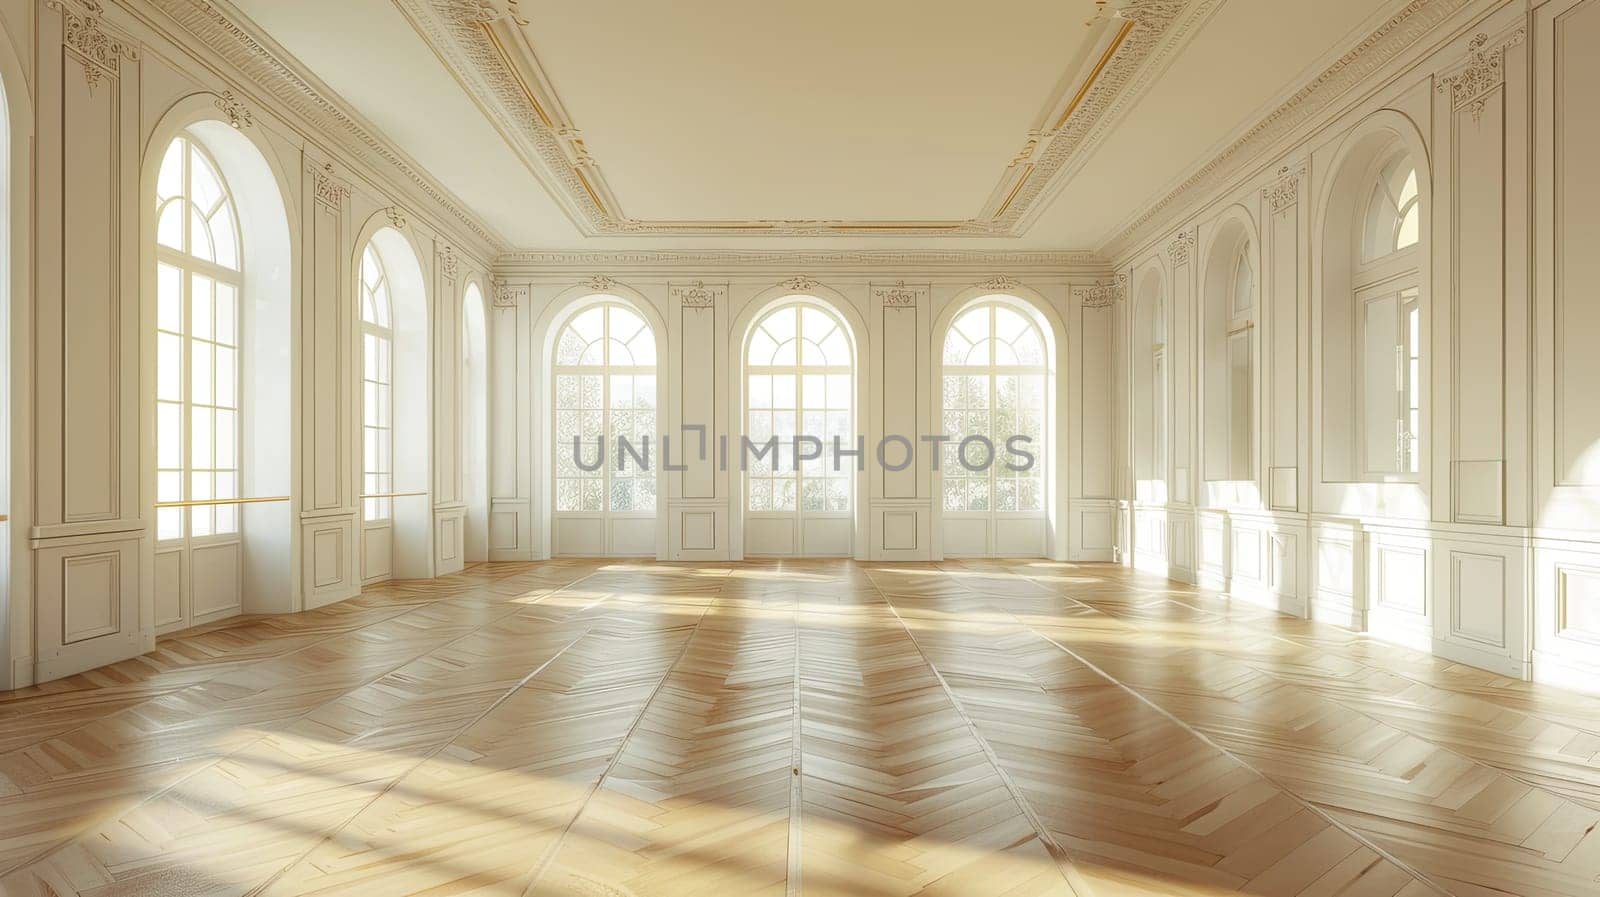 An empty vintage banquet hall with a parquet floor and abundant windows letting in light.